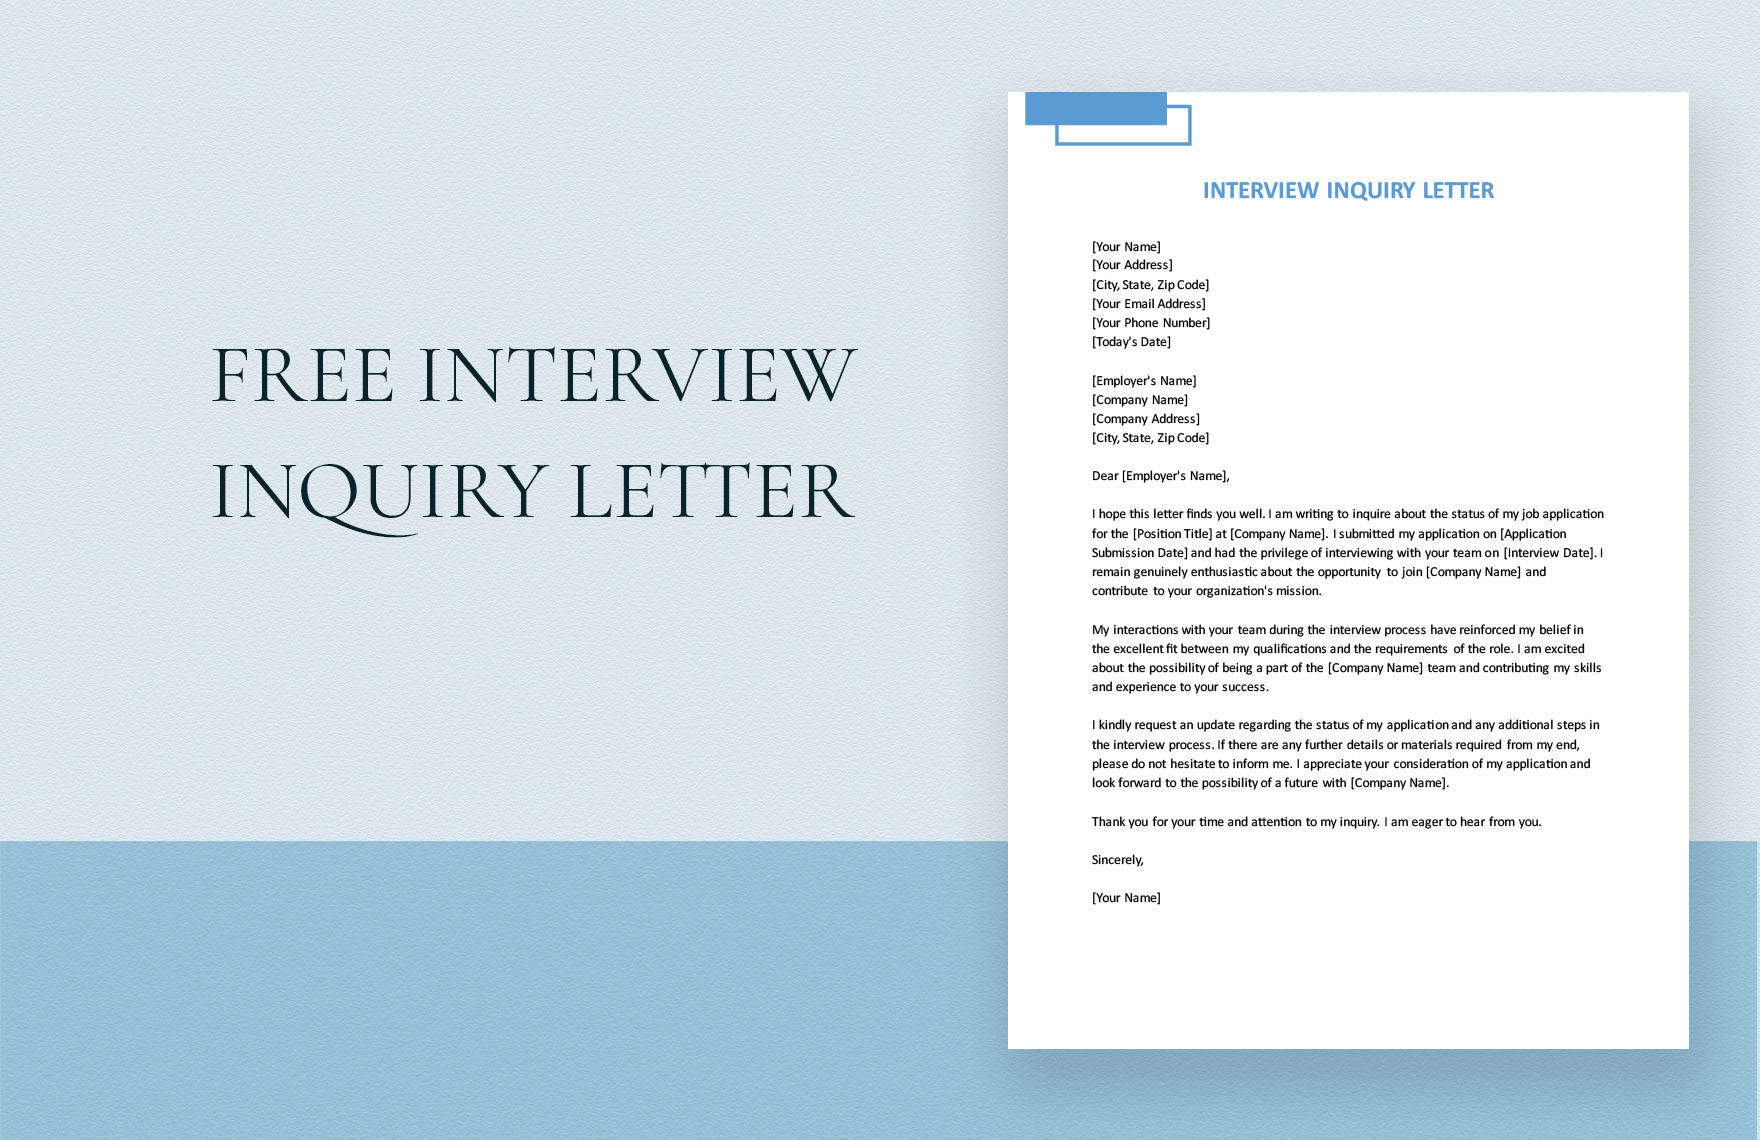 Free Interview Inquiry Letter